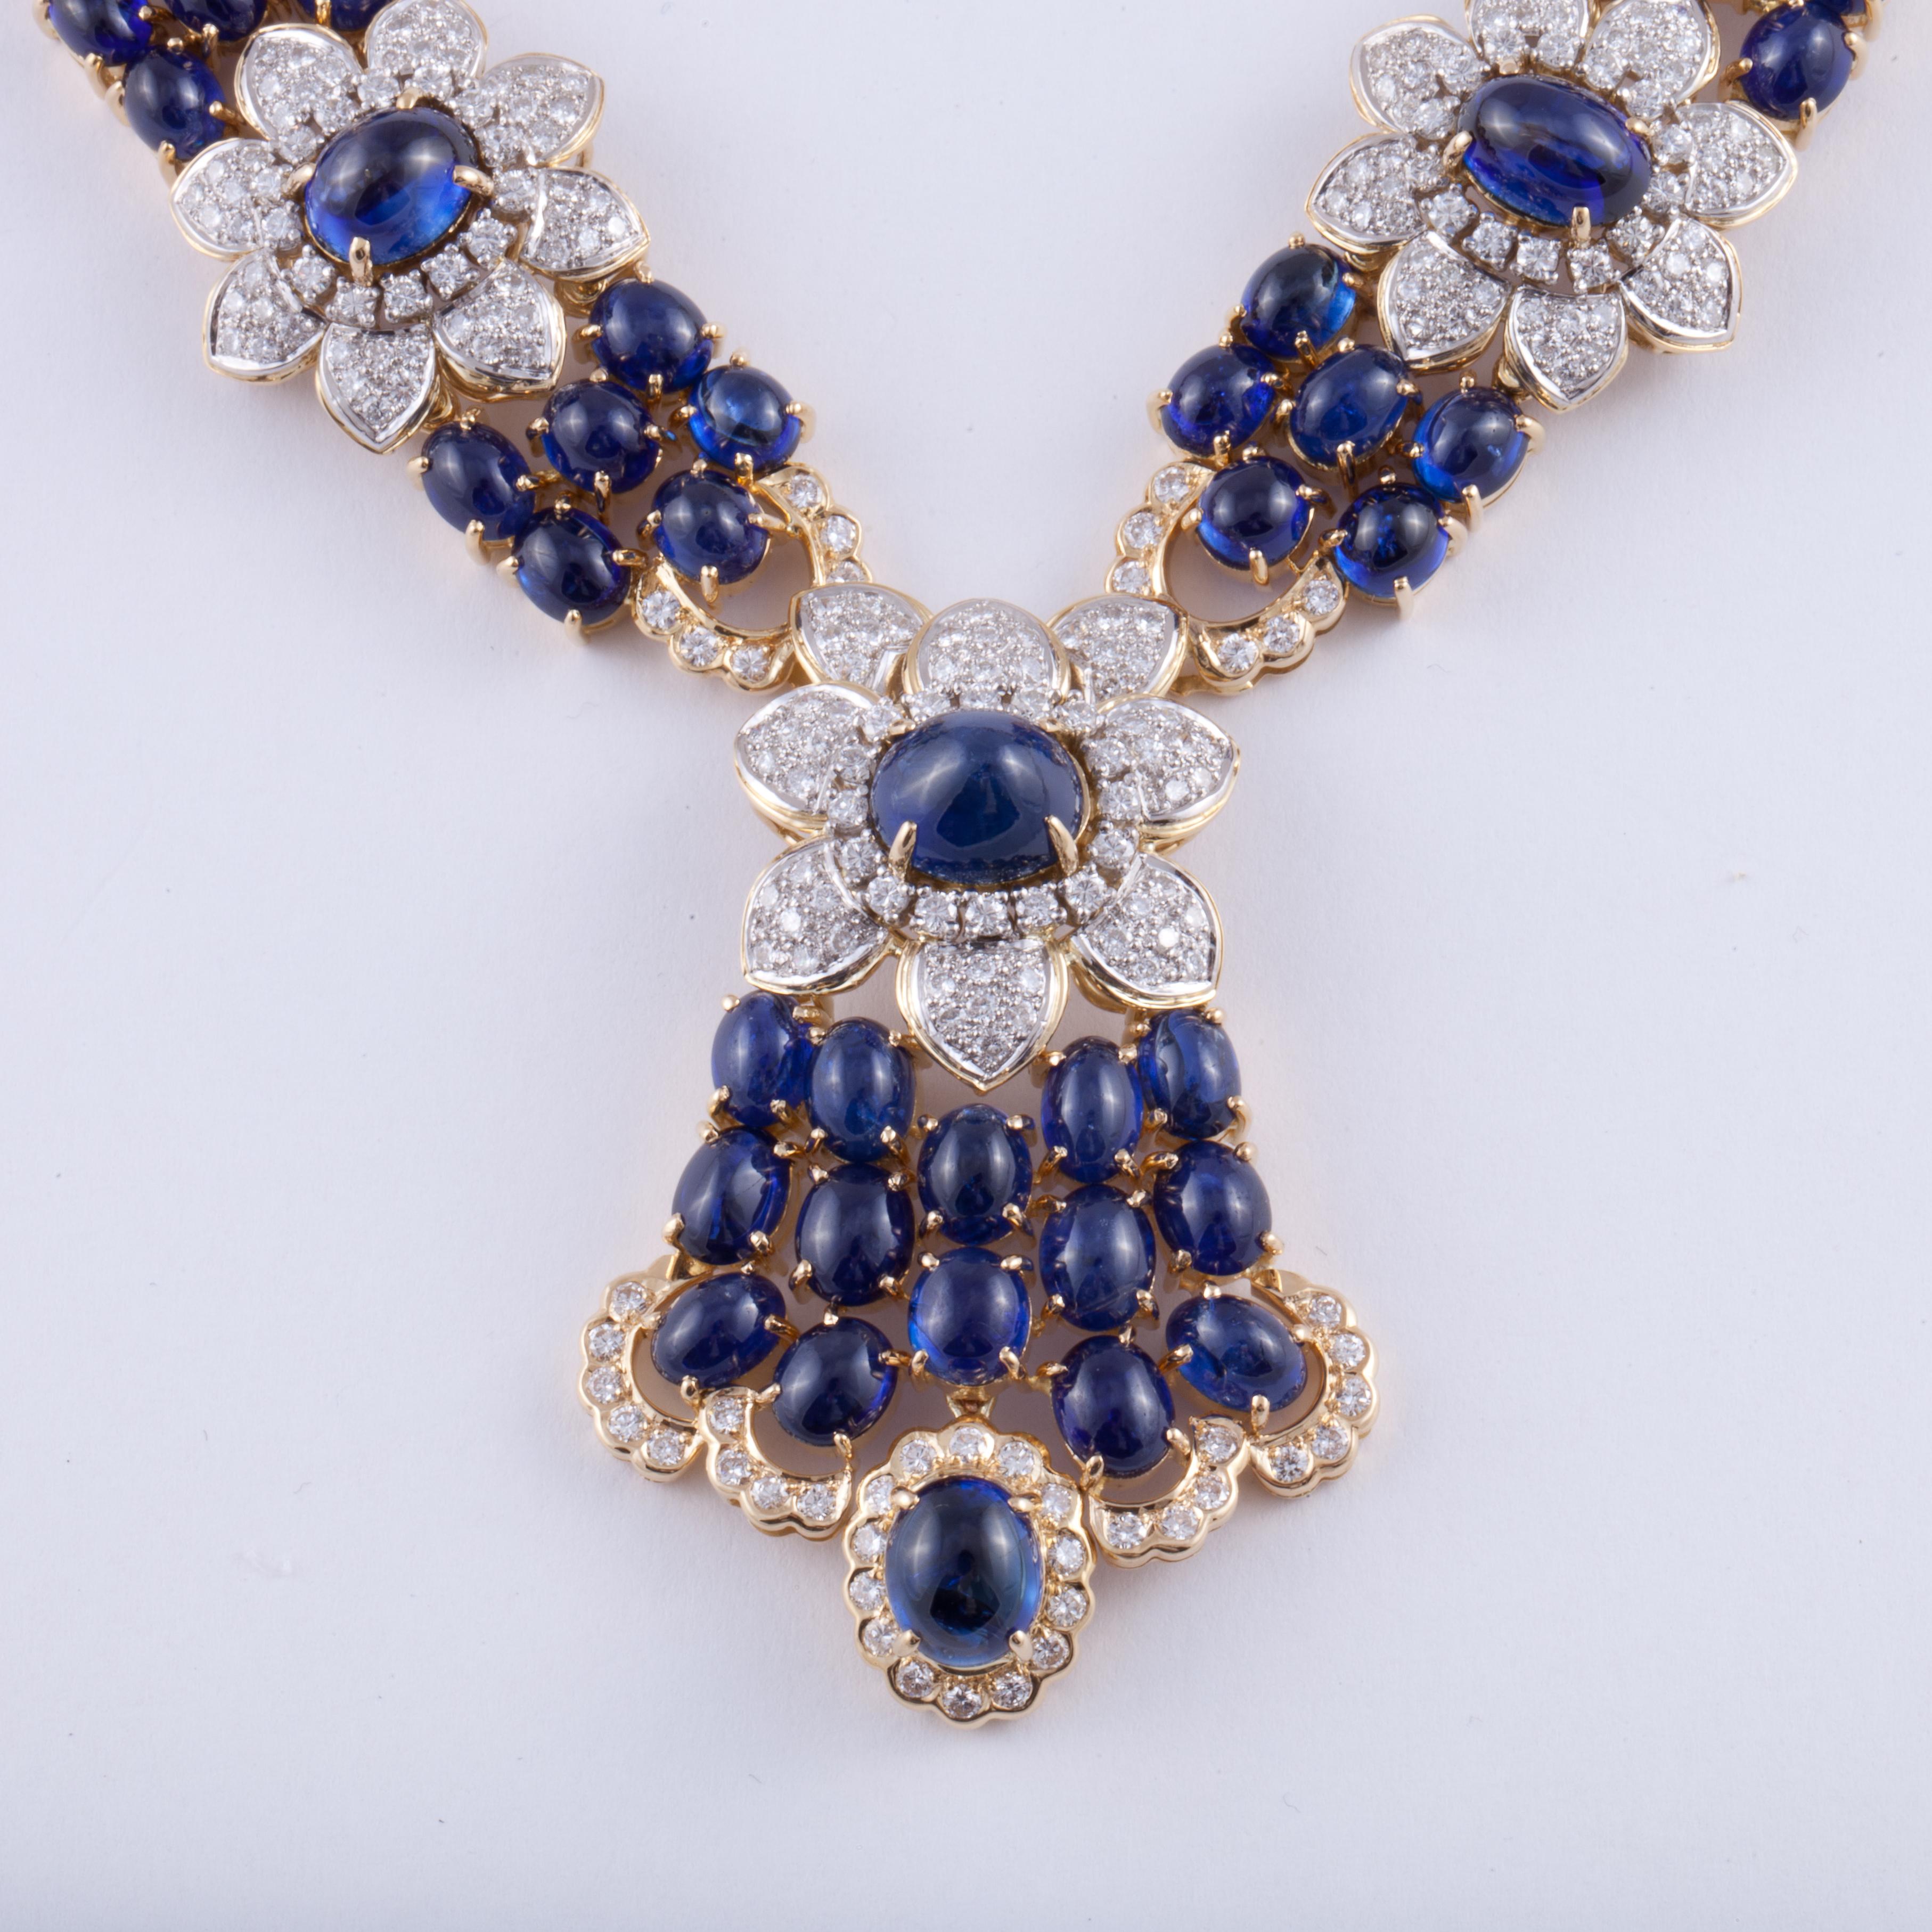 18K yellow gold necklace featuring cabochon blue sapphires and diamonds.  There are 91.37 carats of sapphires and 7.97 carats of round diamonds.  The drop includes a flower with cascading sapphires and diamonds.  It measures 2 1/8 inches long and 1